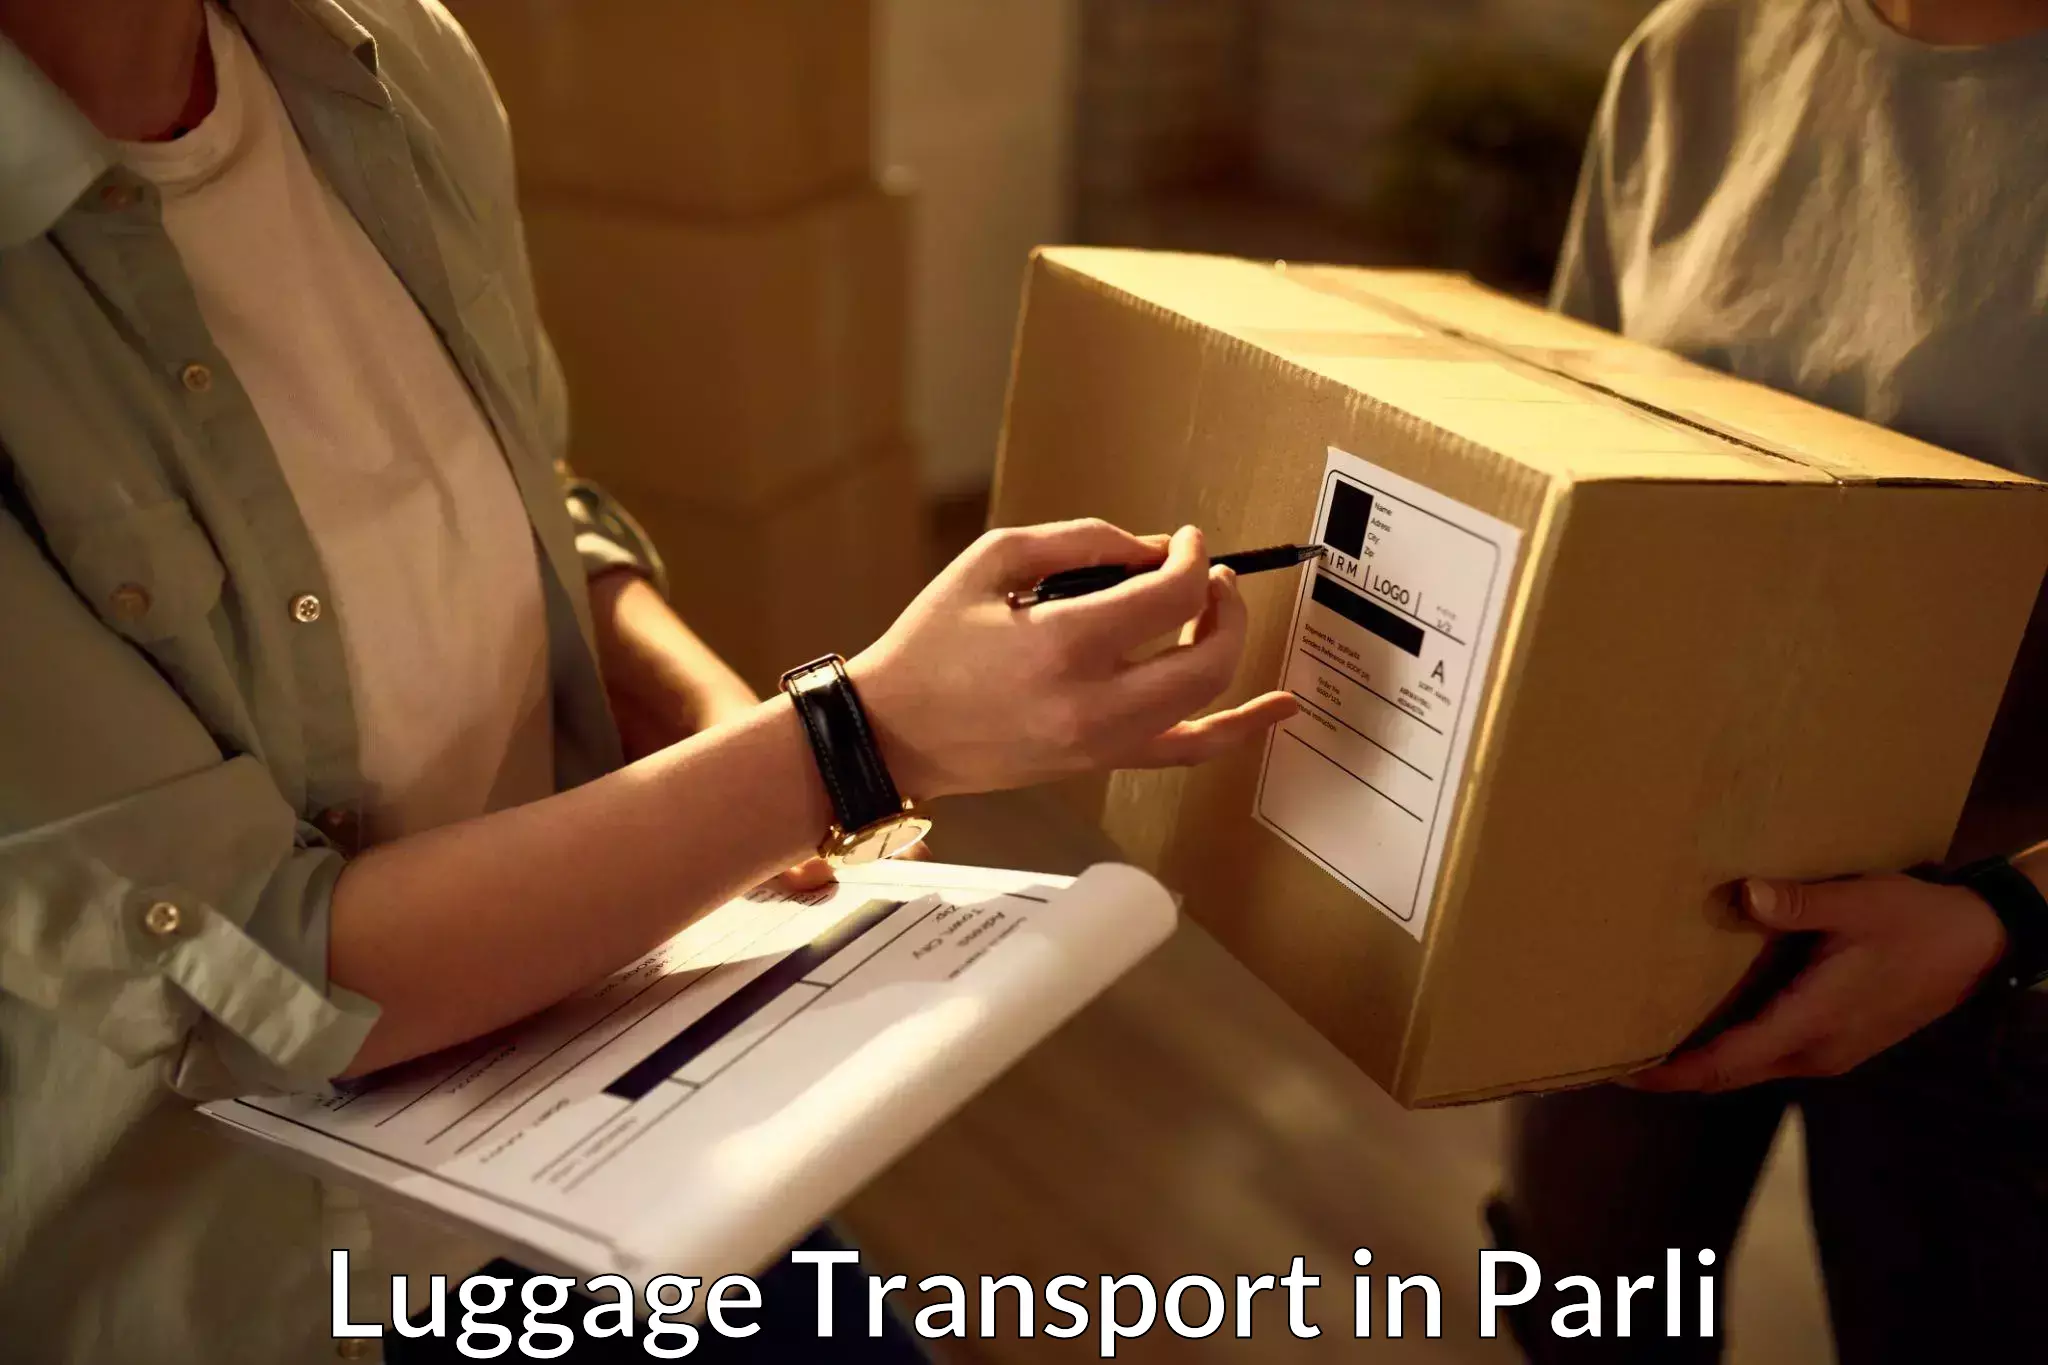 Heavy luggage shipping in Parli